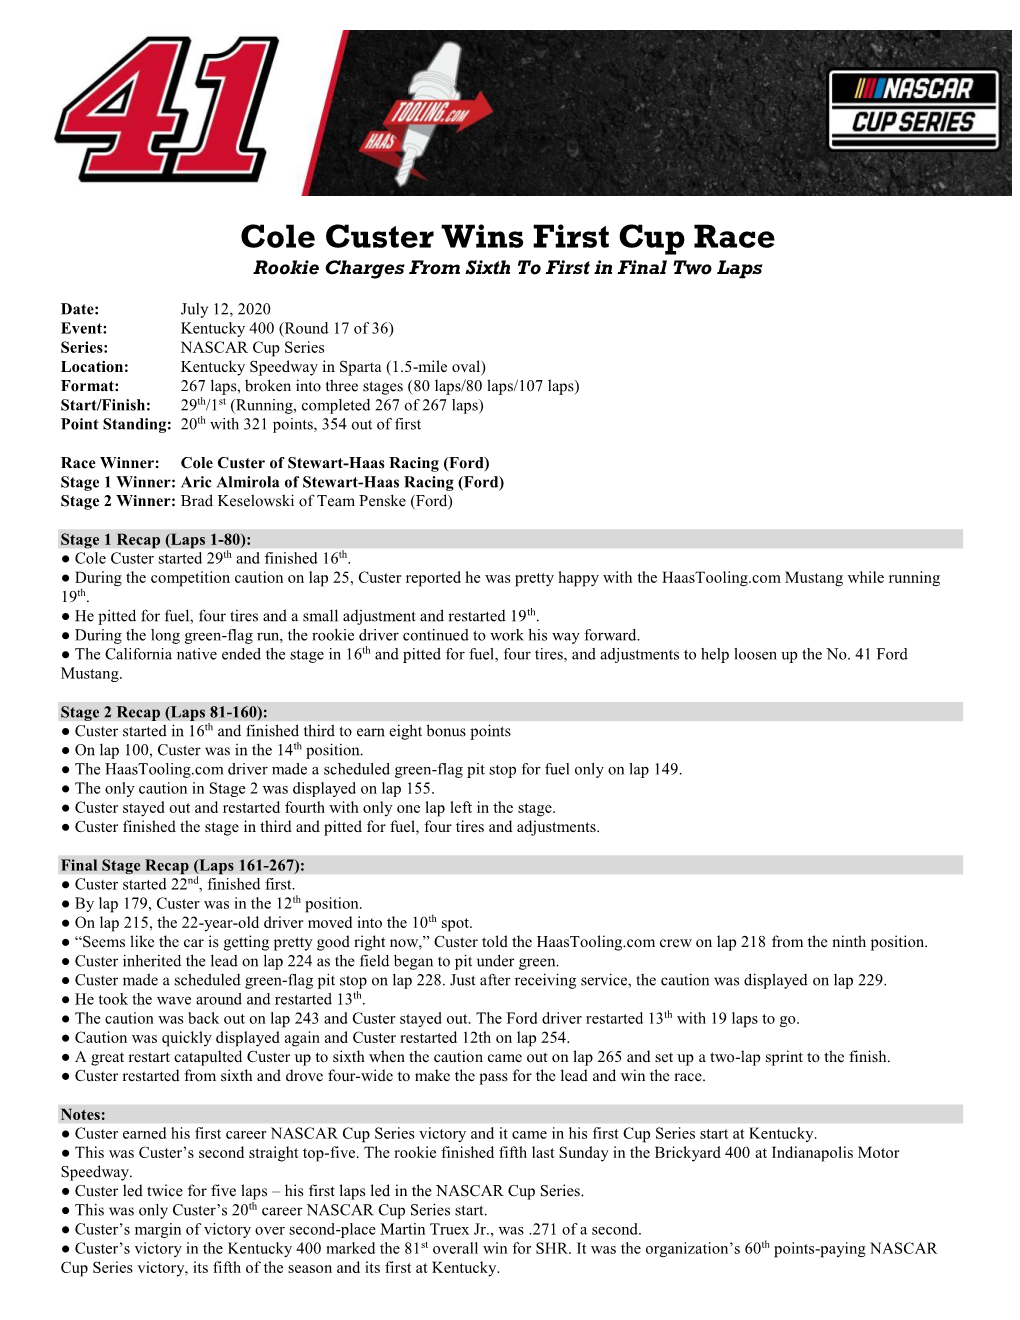 Cole Custer Wins First Cup Race Rookie Charges from Sixth to First in Final Two Laps